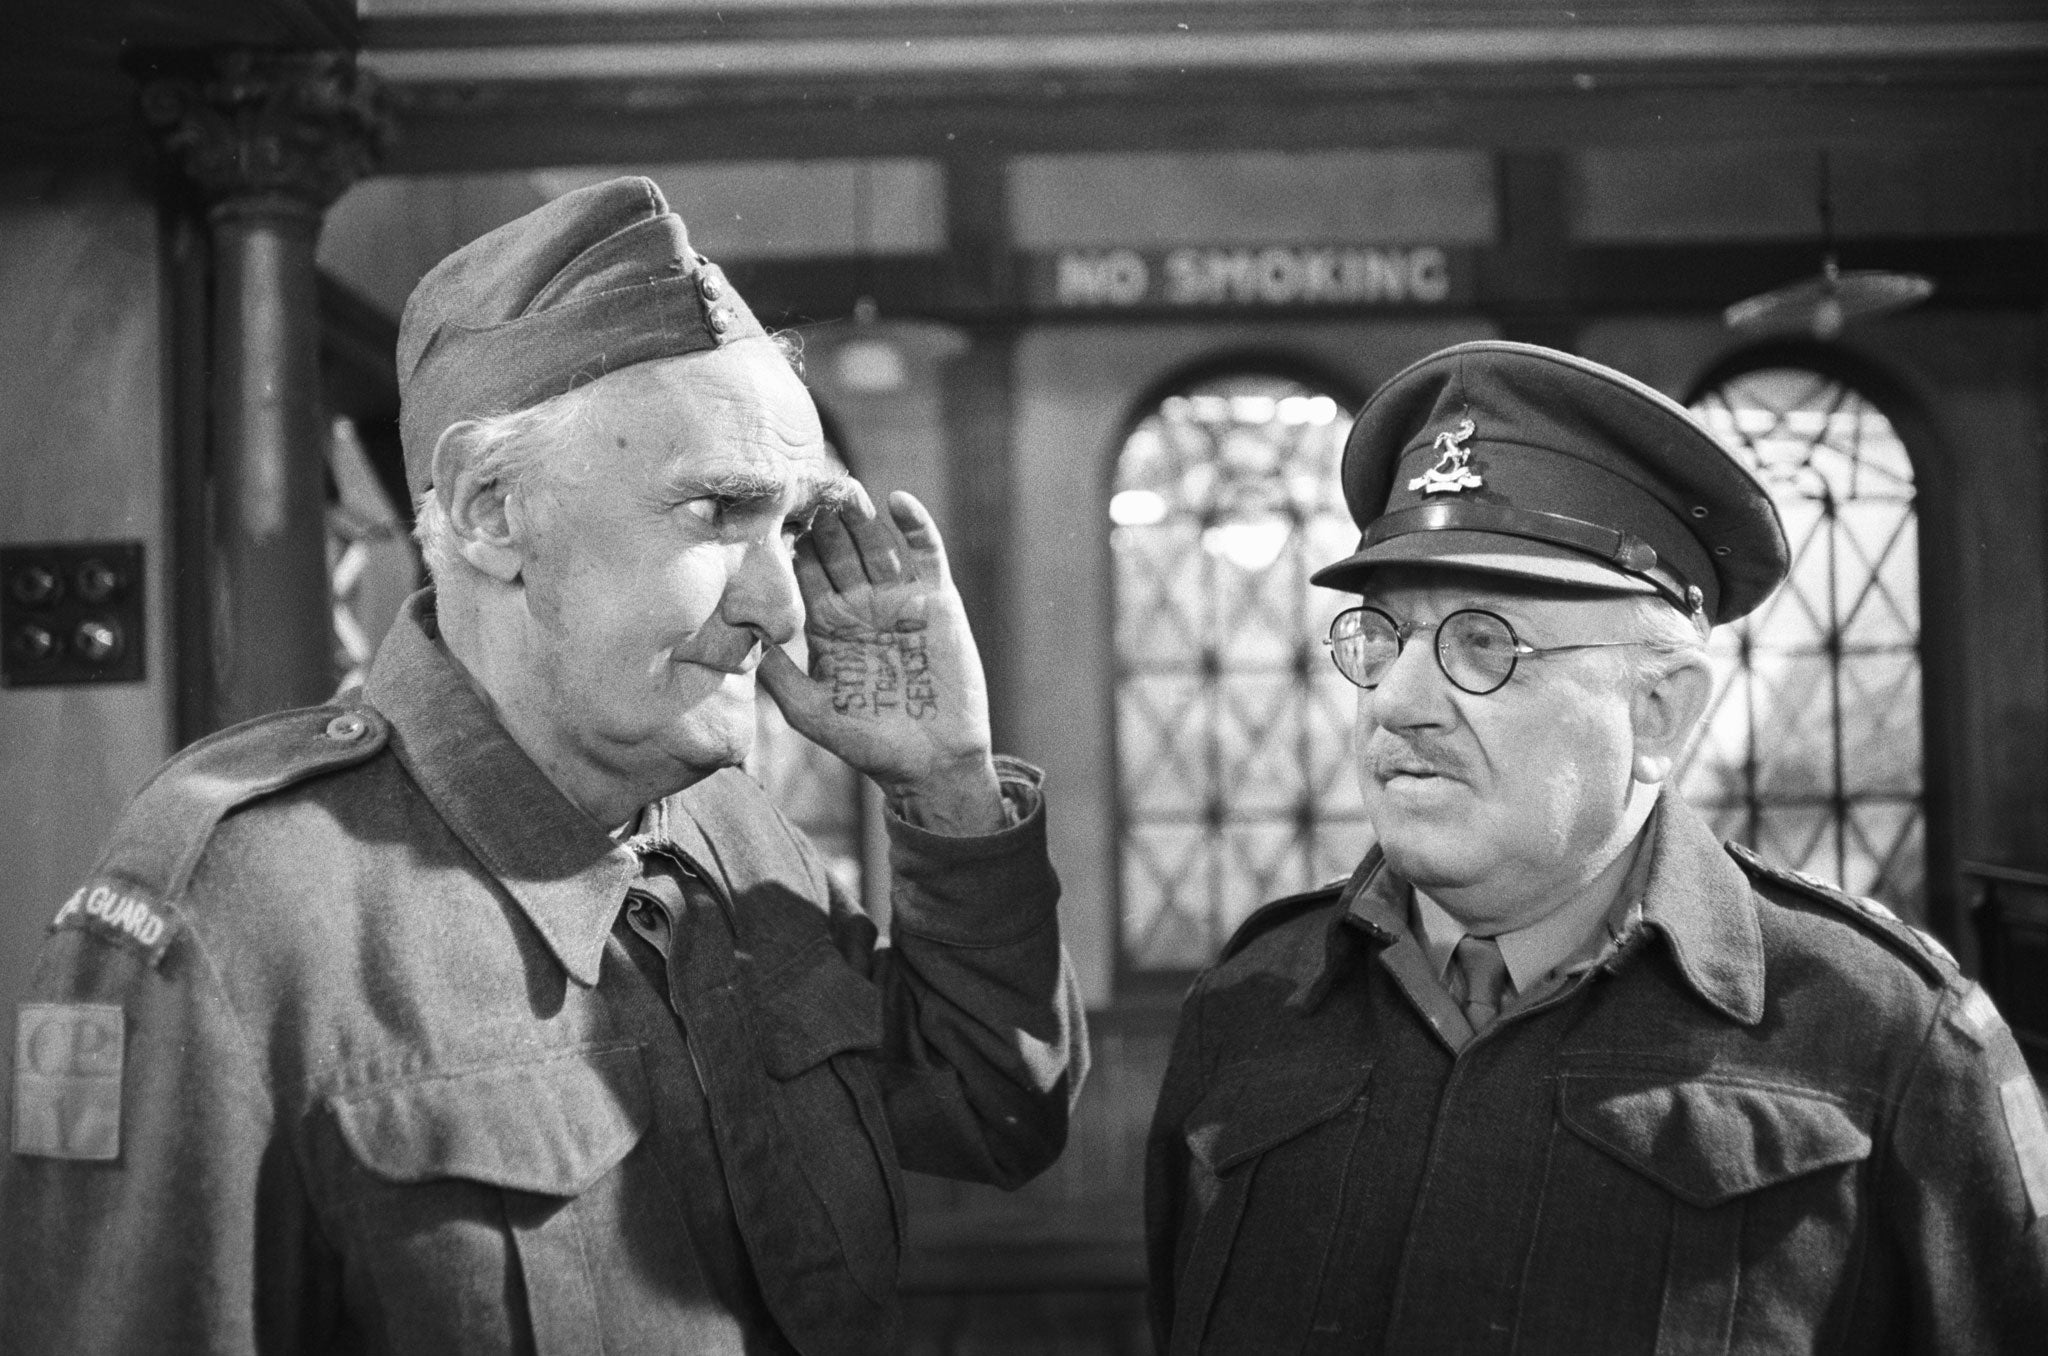 John Laurie (Private Frazer) and Arthur Lowe (Captain Mainwaring) during an episode of the BBC comedy series 'Dad's Army' filmed on July 30, 1977.